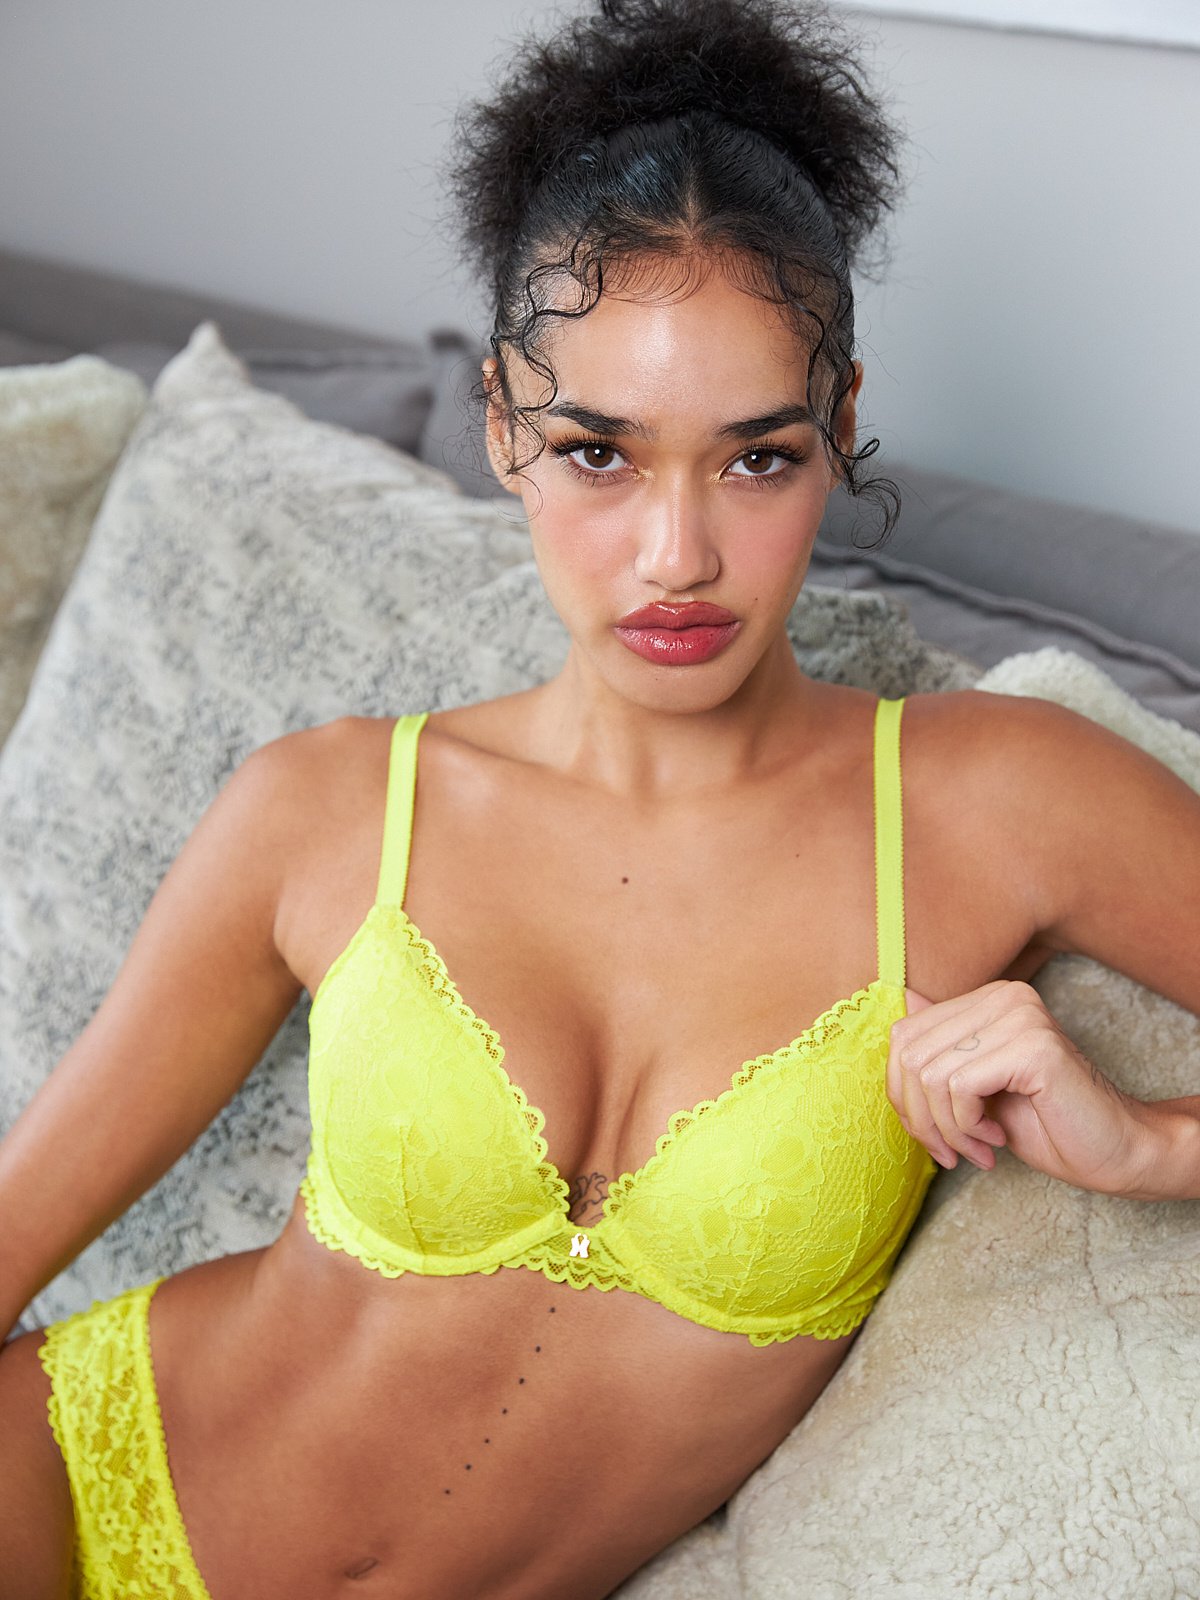 Floral Lace Push-Up Bra in Yellow